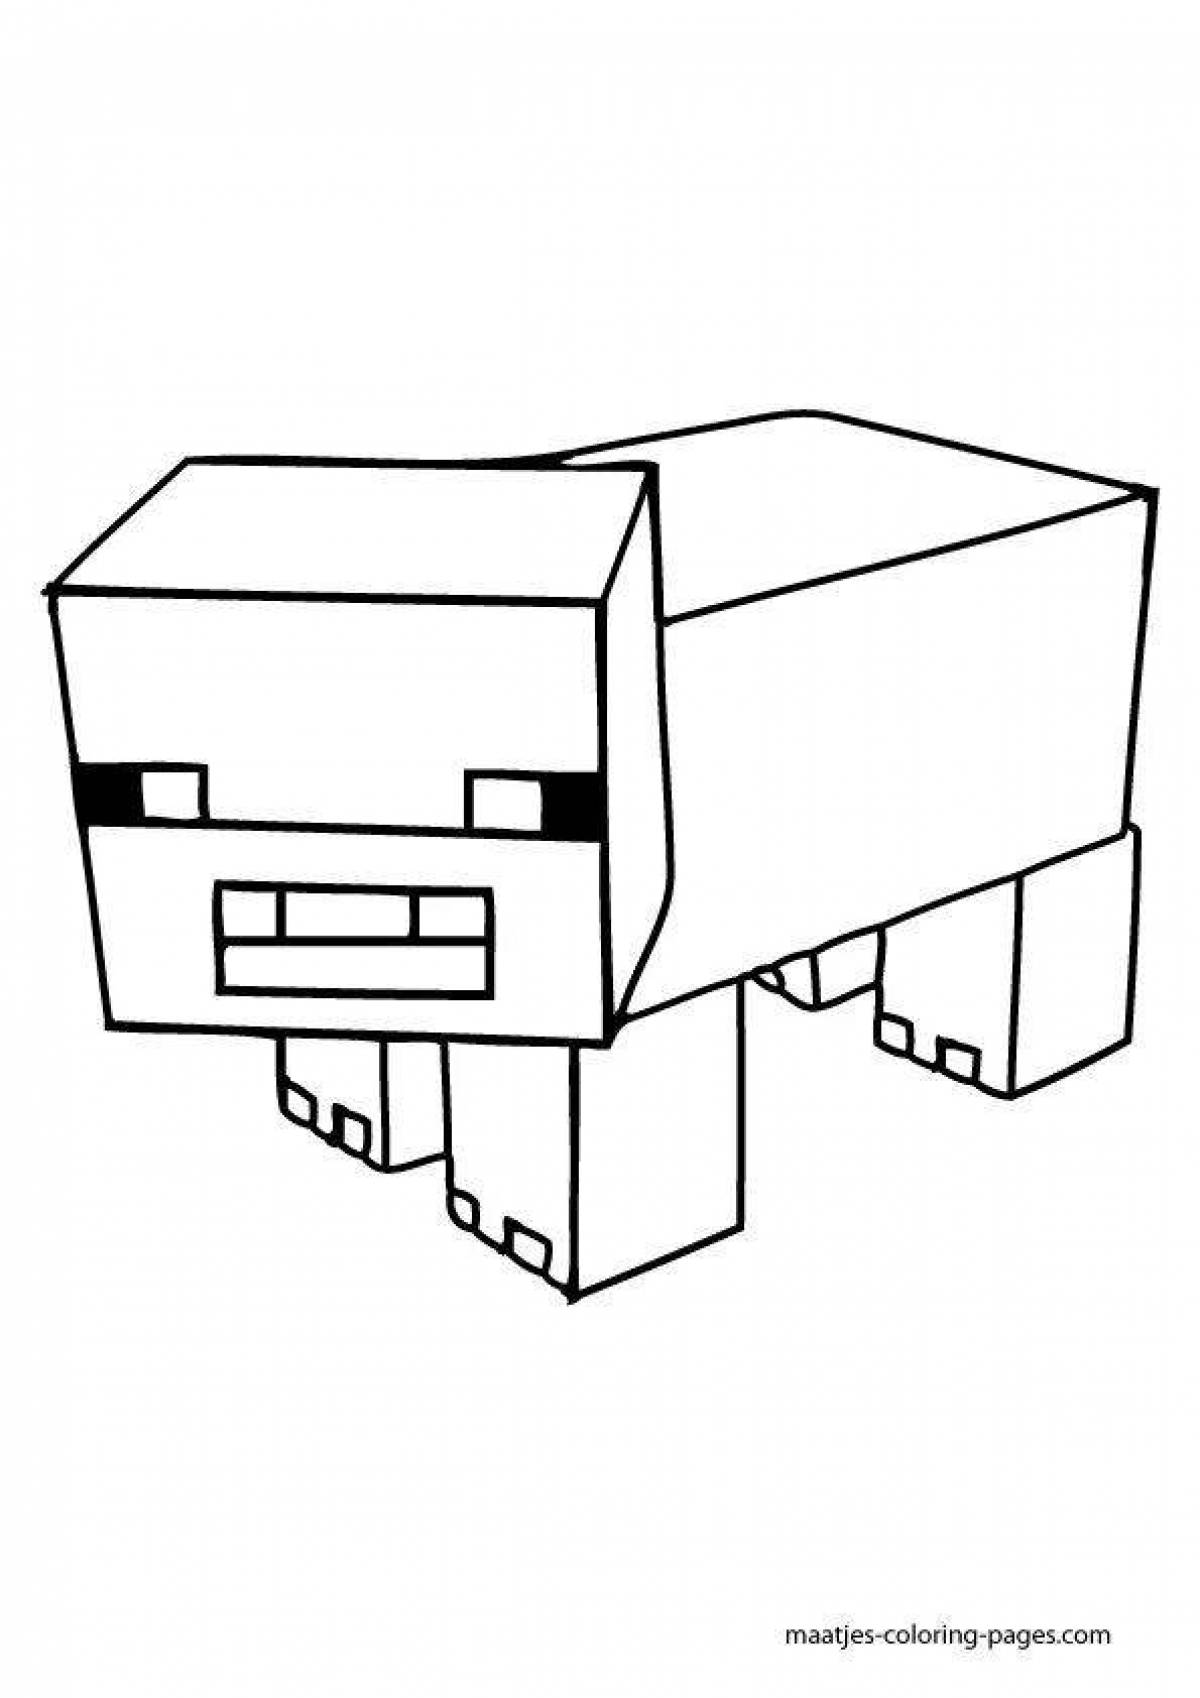 Minecraft animal coloring page